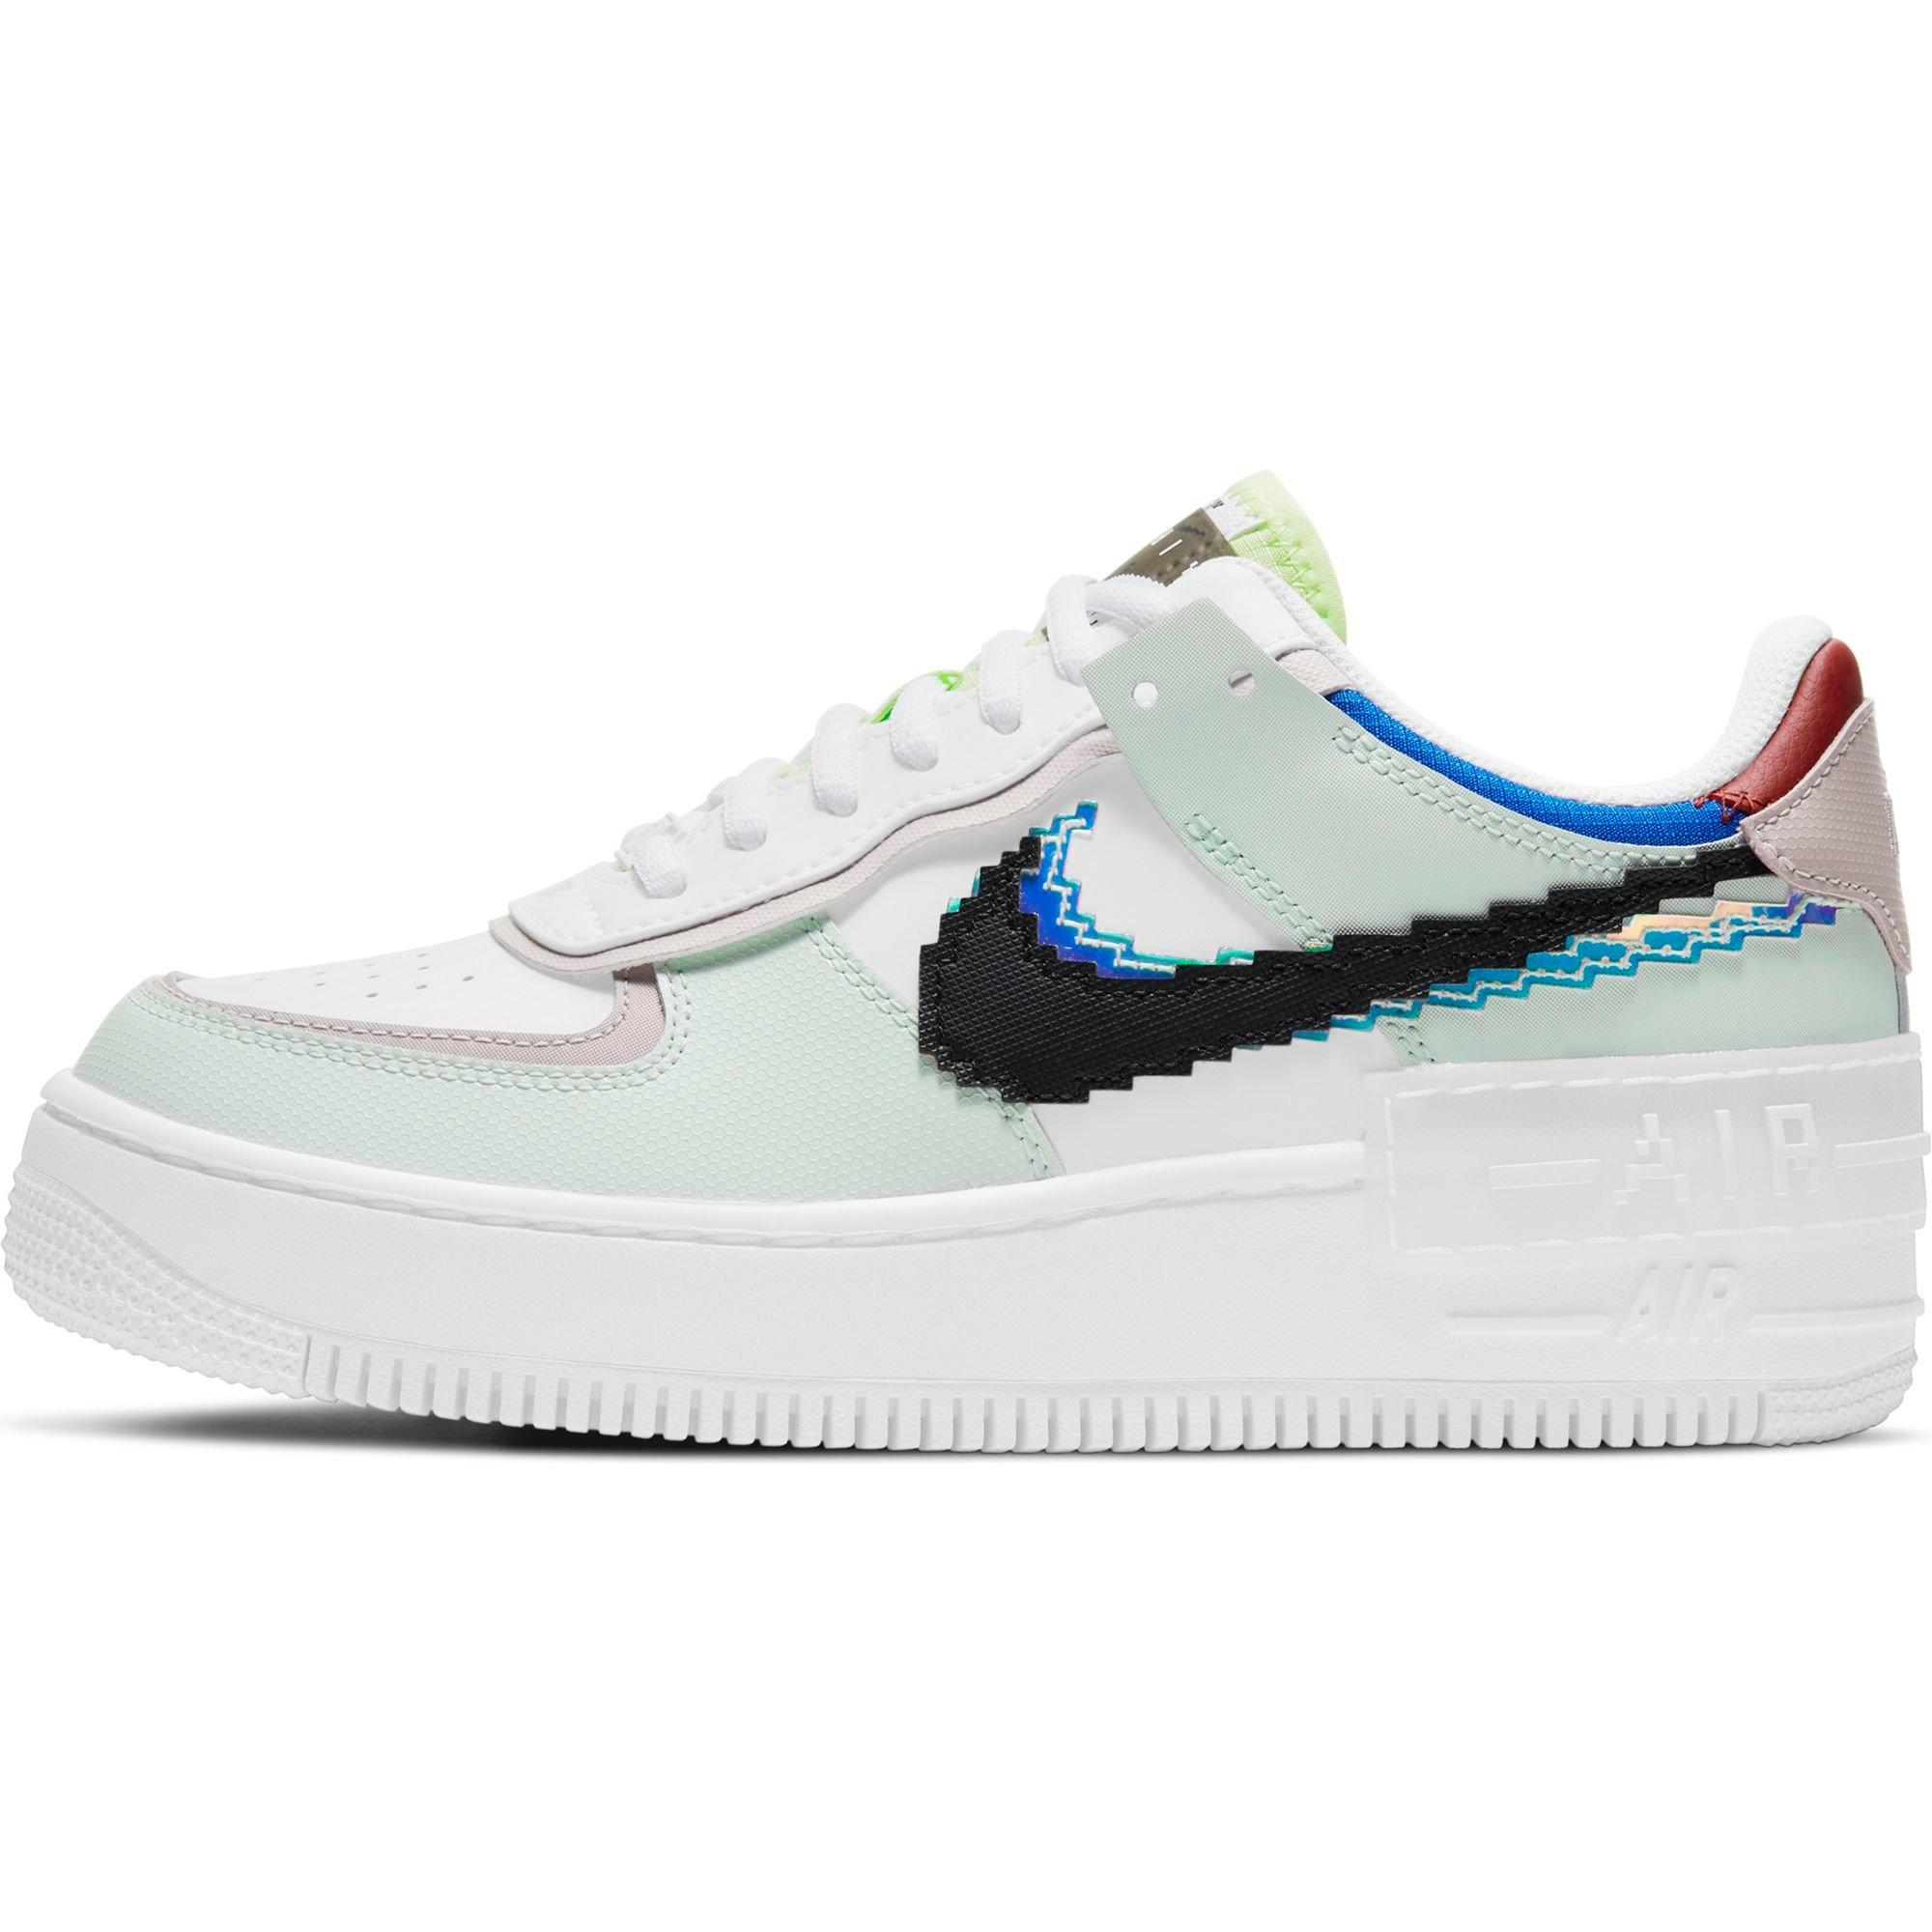 Nike Air Force 1 Shadow Trainers Barely Green Black White Platinum Violet -  Women's Trainers